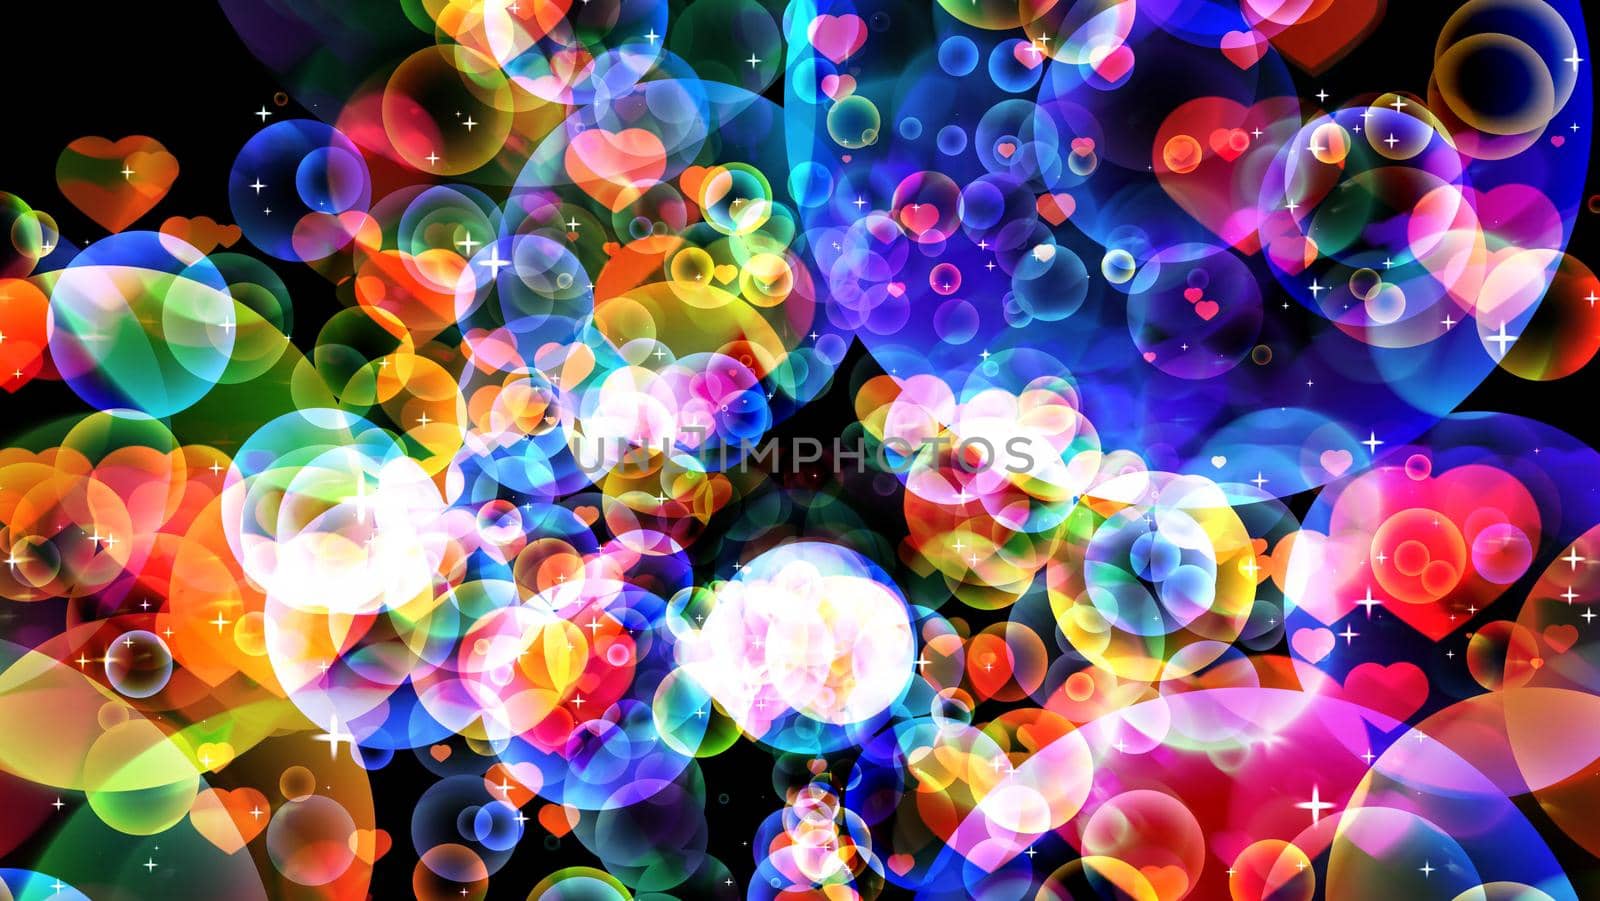 abstract dimension rainbow bubbles with dancing hearts floating on black screen with white star theme valentine day and love concept background